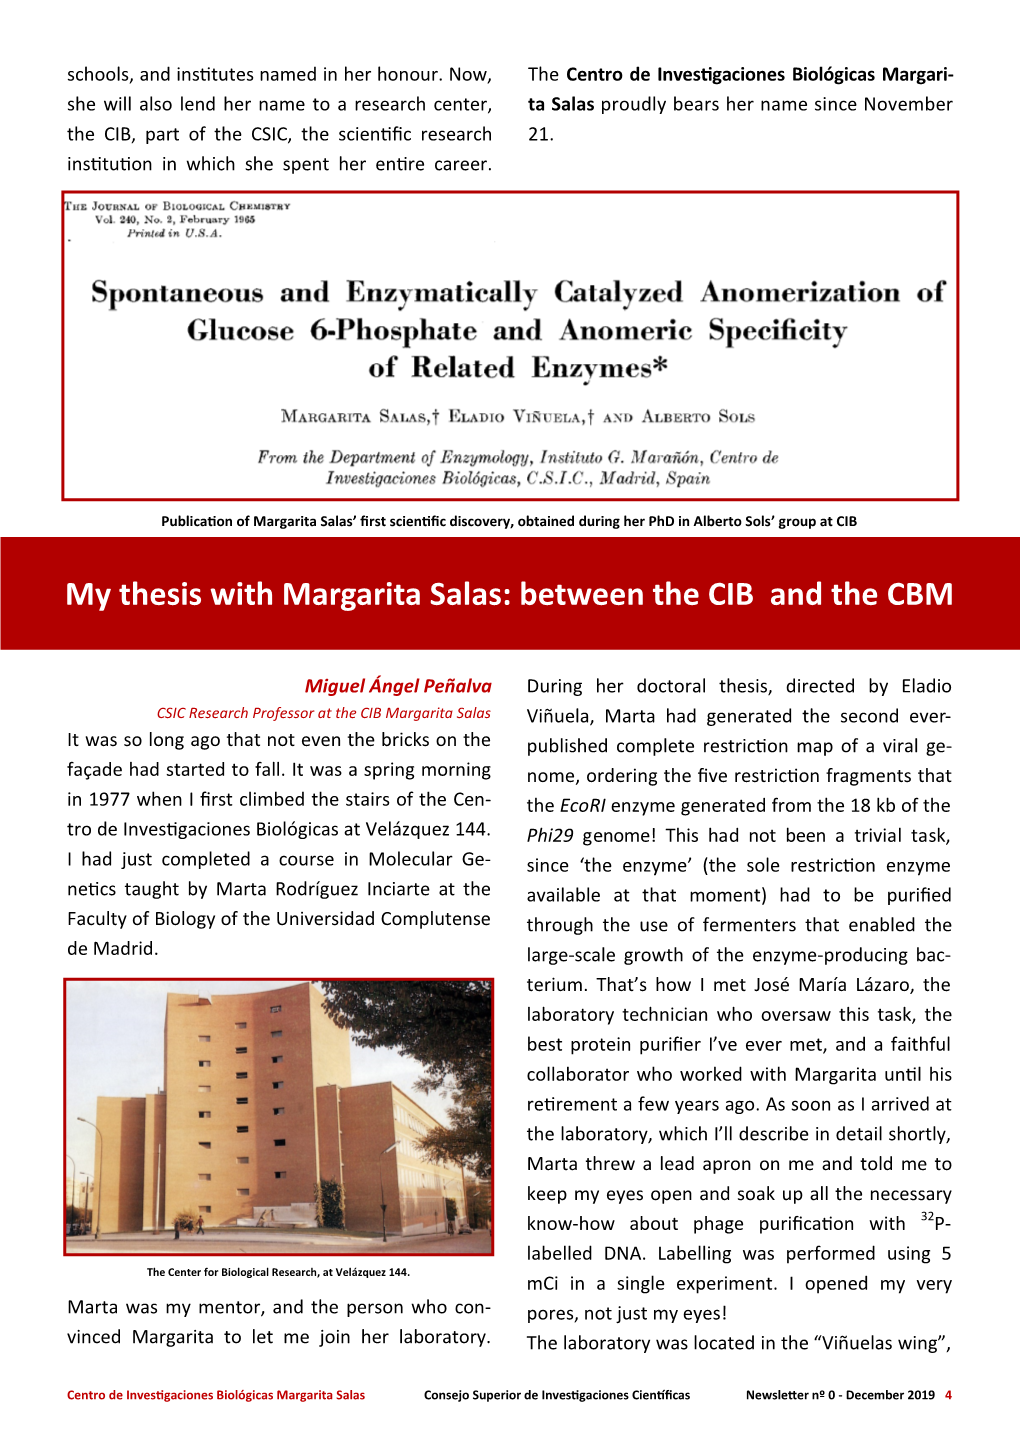 My Thesis with Margarita Salas: Between the CIB and the CBM